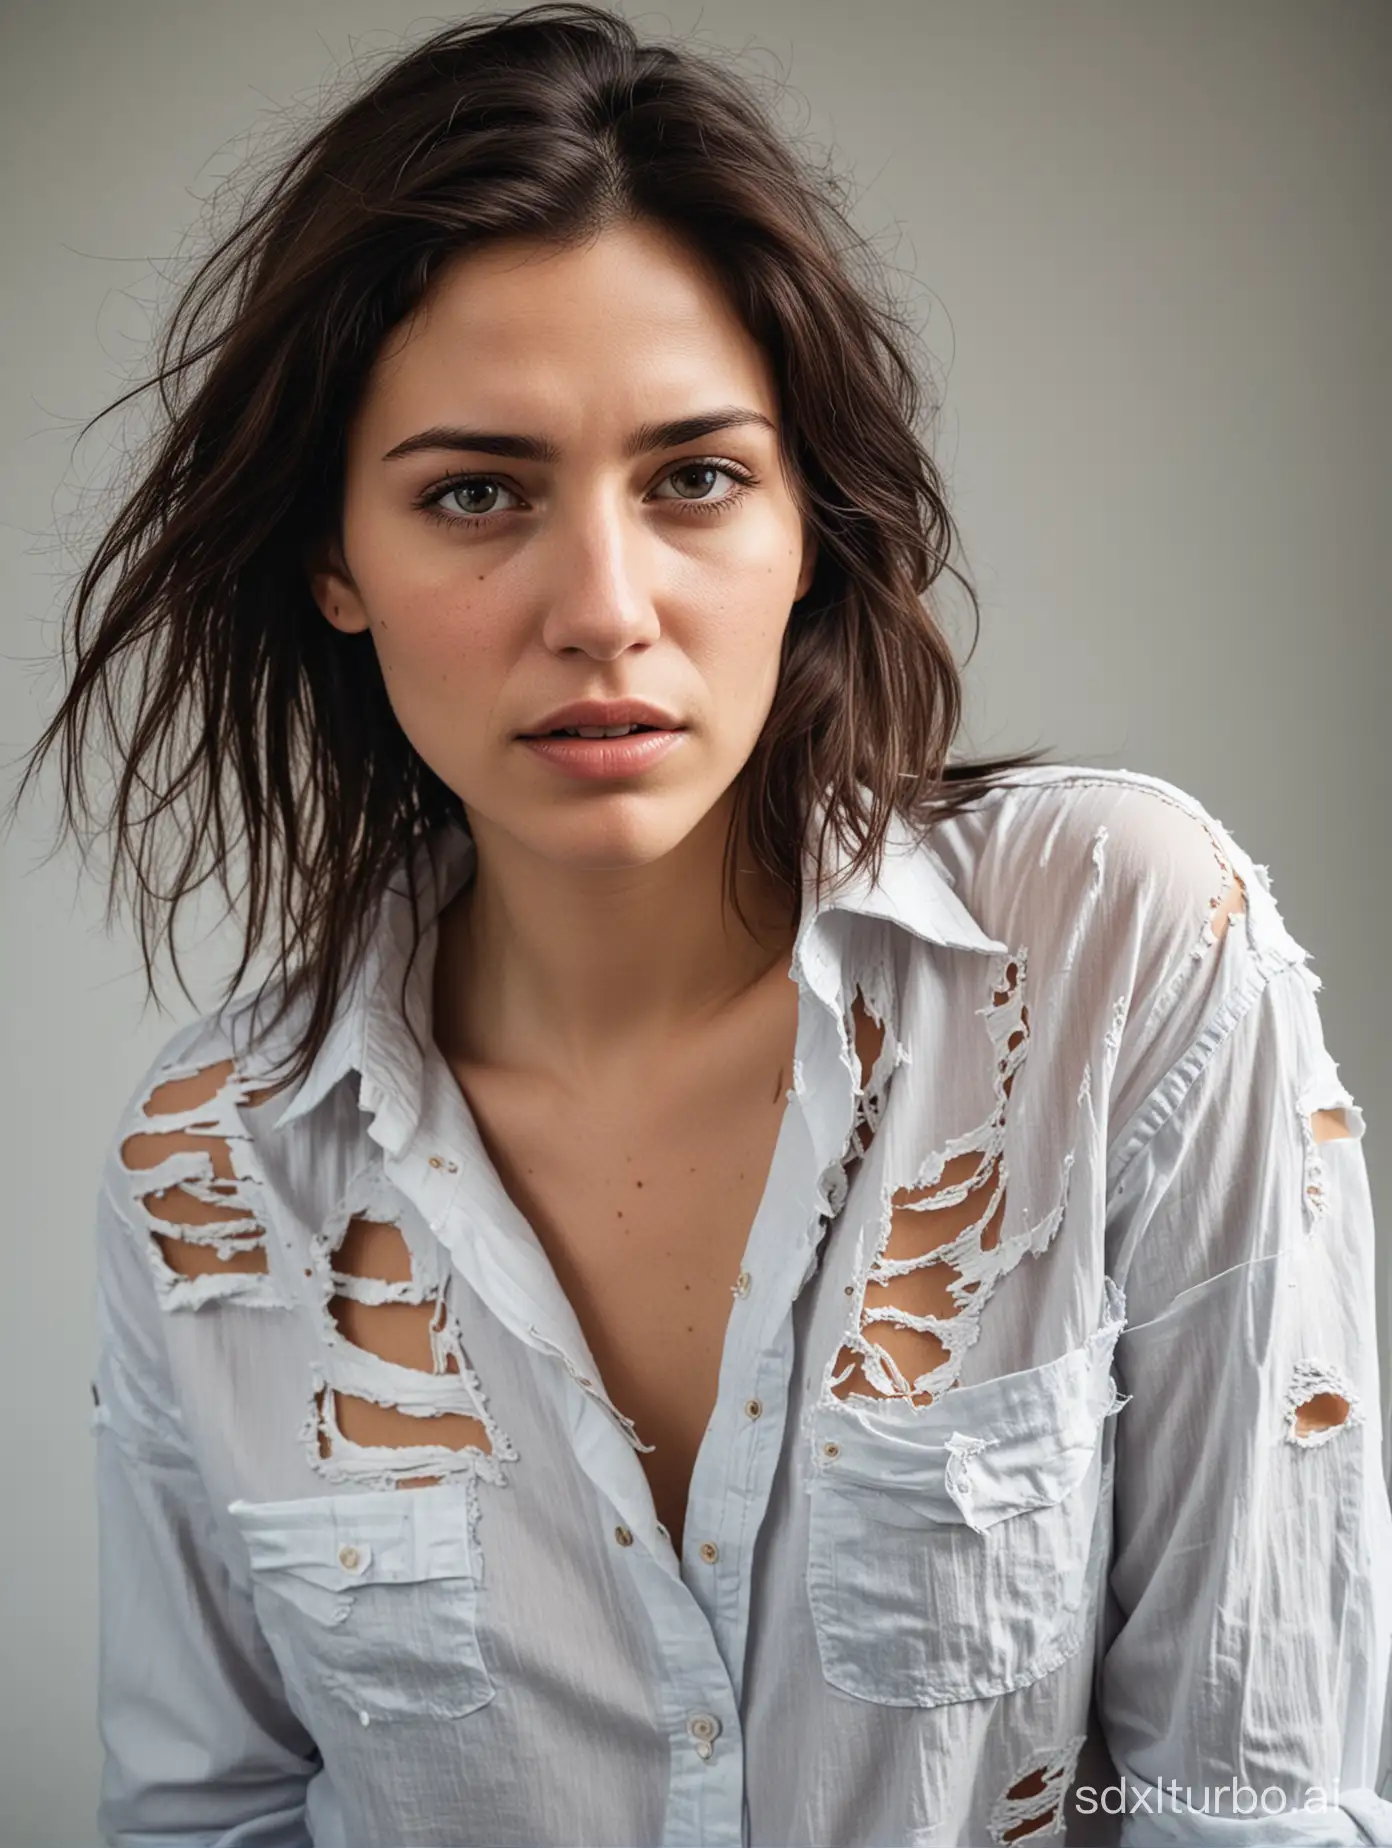 A woman wearing a torn ripped disheveled shirt with holes that exposes her skin